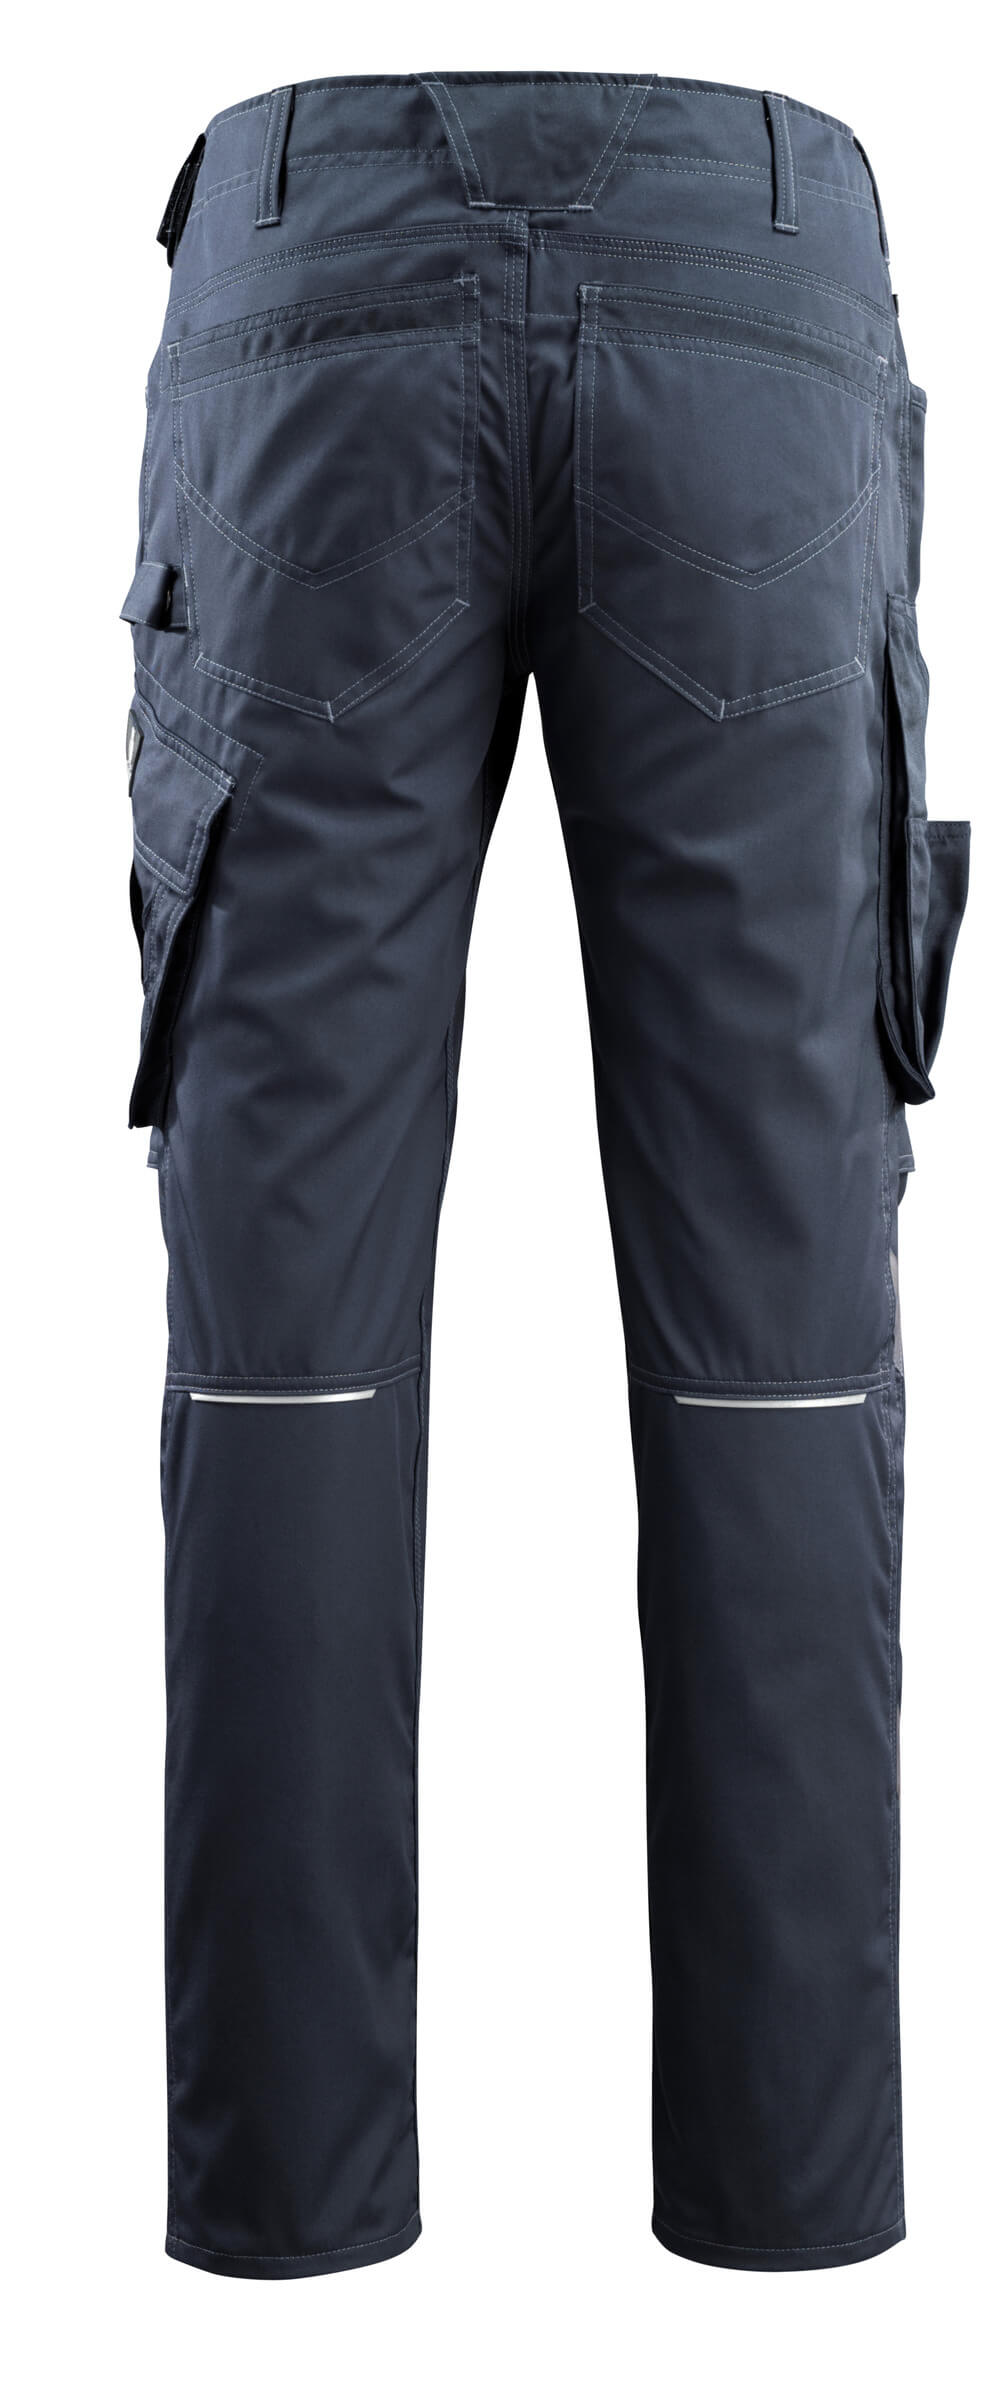 Mascot UNIQUE  Lemberg Trousers with kneepad pockets 16079 dark navy